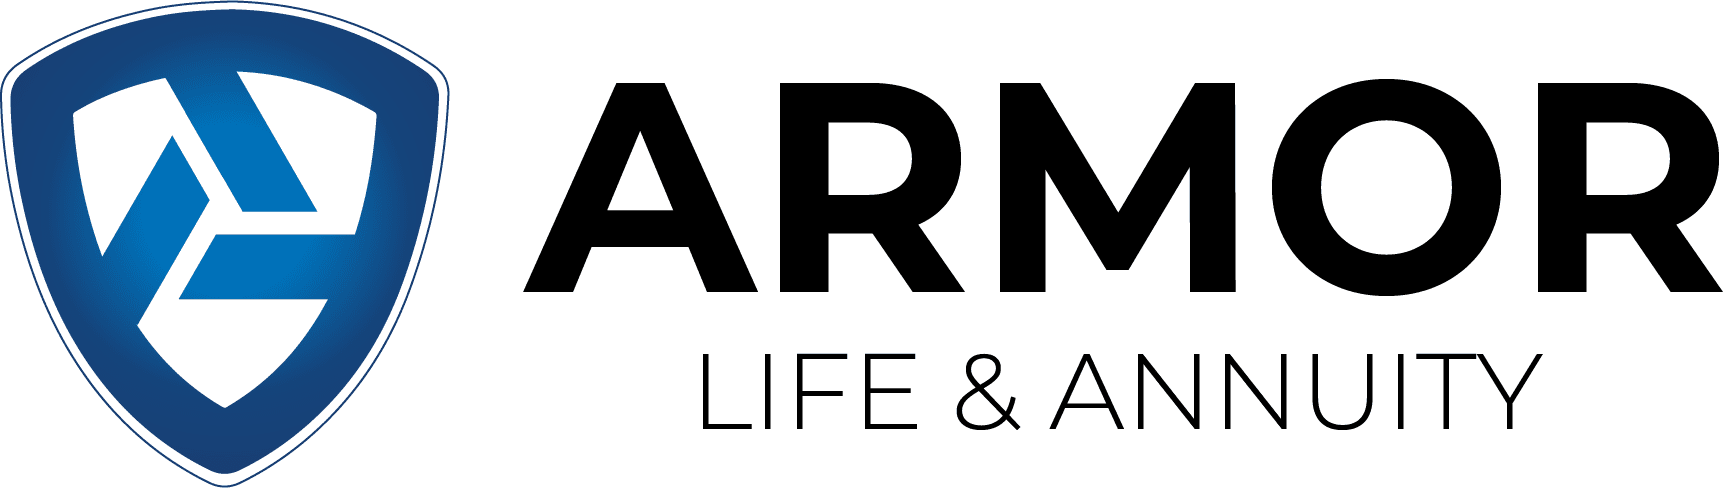 Armor Life and Annuity _ In-Line Full Logo _ Blue Gradient